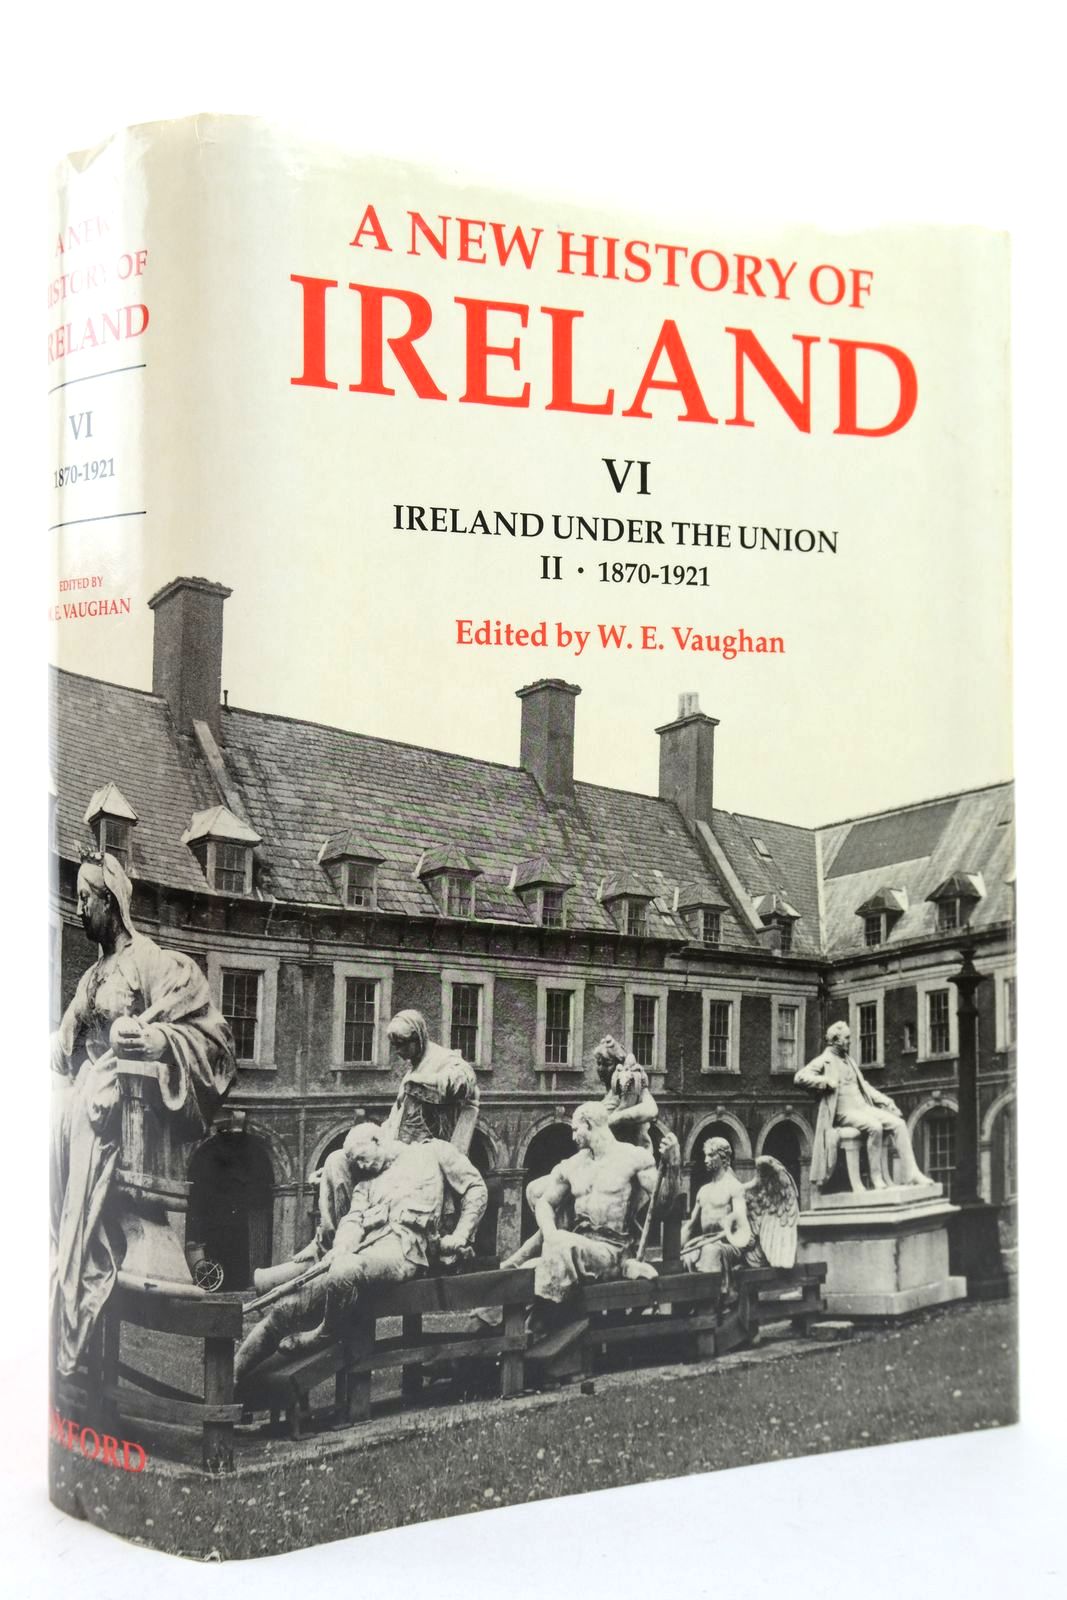 Photo of A NEW HISTORY OF IRELAND VI: IRELAND UNDER THE UNION, II 1870-1921 written by Vaughan, W.E. et al, published by Clarendon Press (STOCK CODE: 2140527)  for sale by Stella & Rose's Books